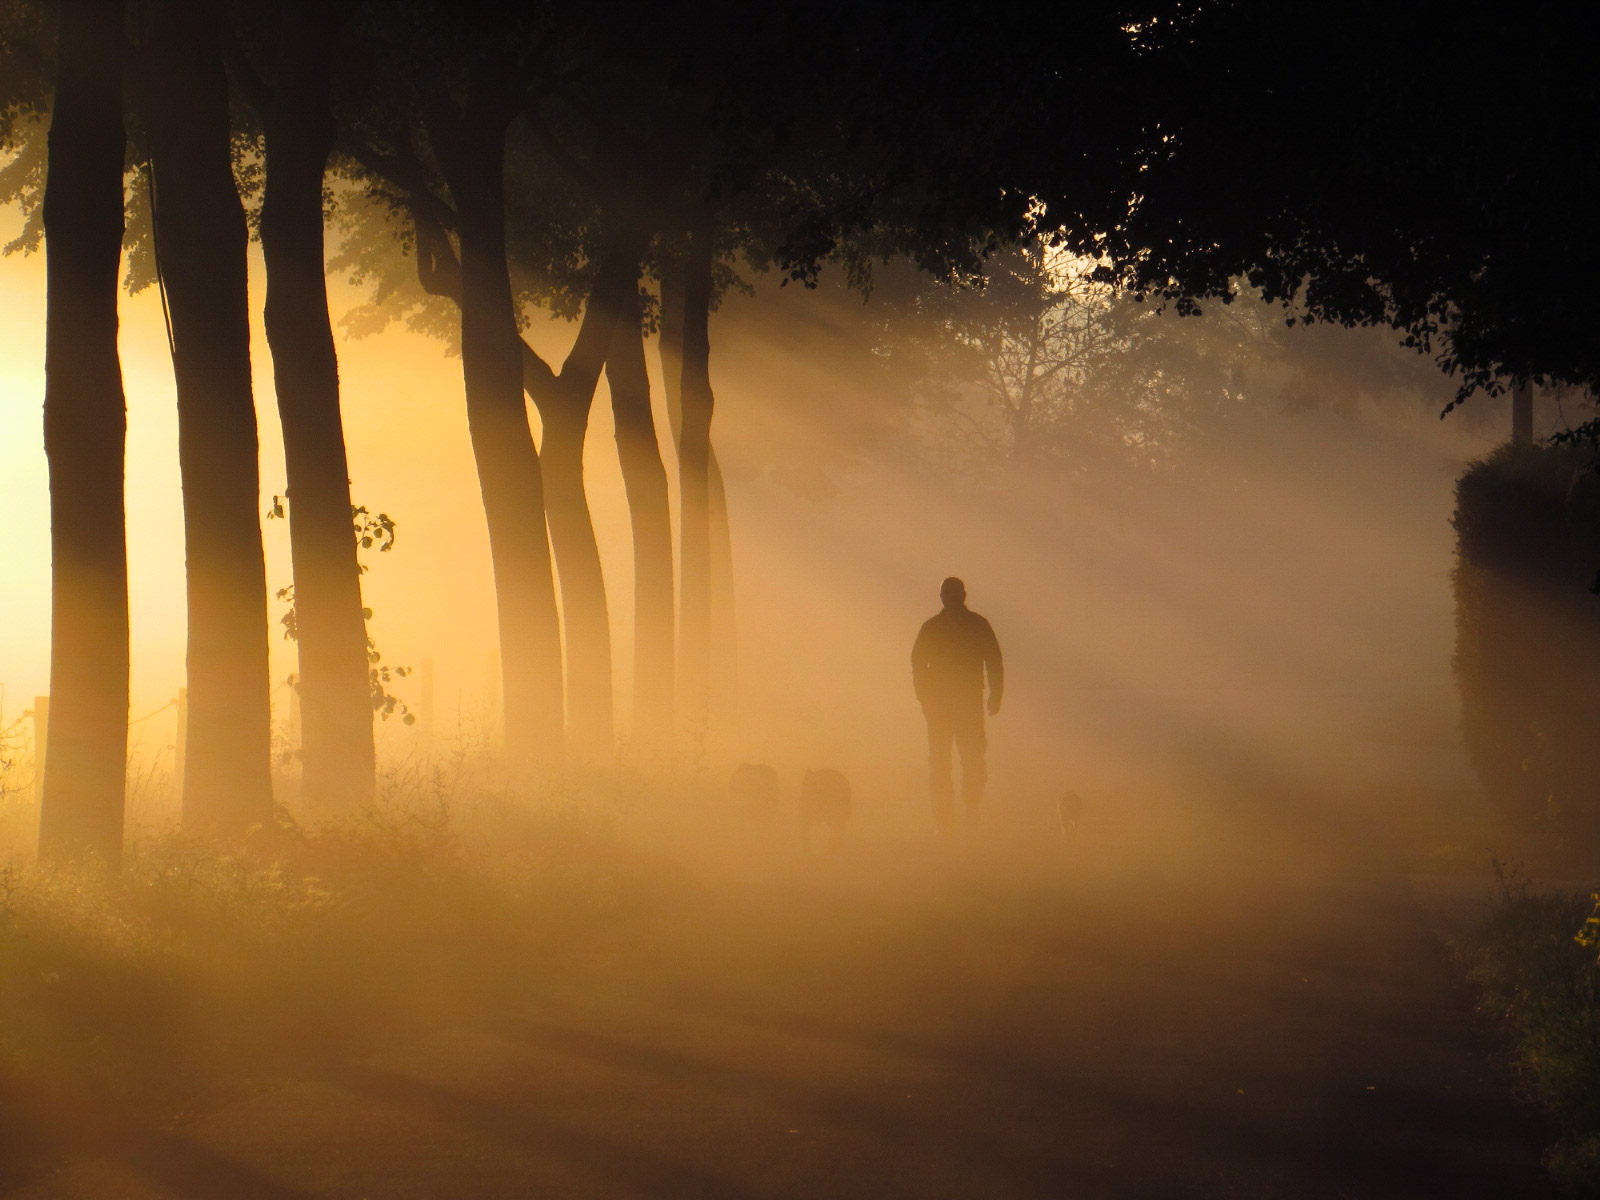 2nd Place Walking into a magic sunrise in the Netherlands by Carina Lichtenberg @70_carina